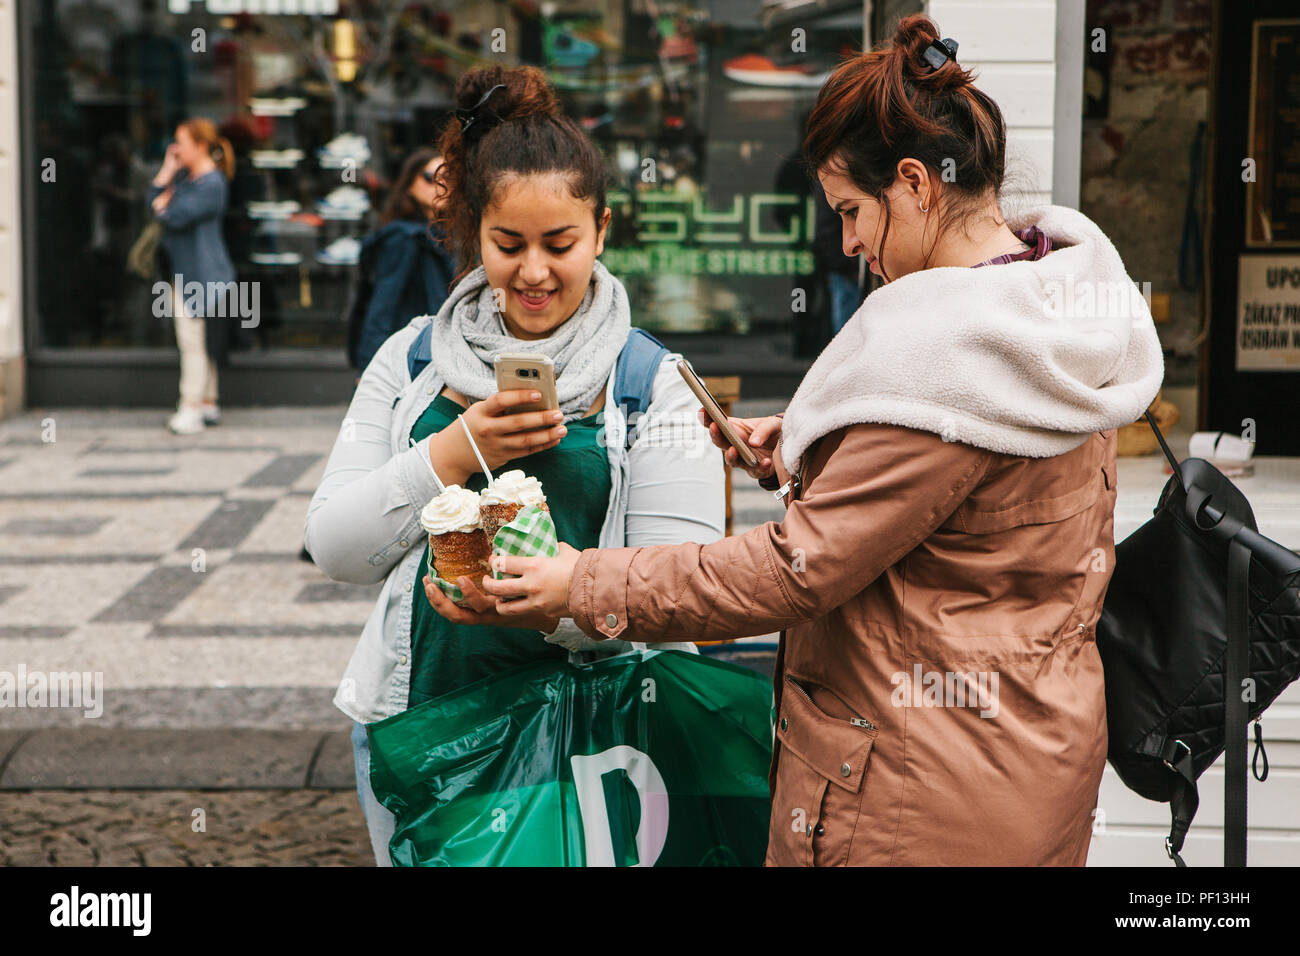 Prague, September 25, 2017: Two friends after shopping in the store stand on the street and take pictures of a traditional Czech dessert called Tridlo and make a post in social networks Stock Photo